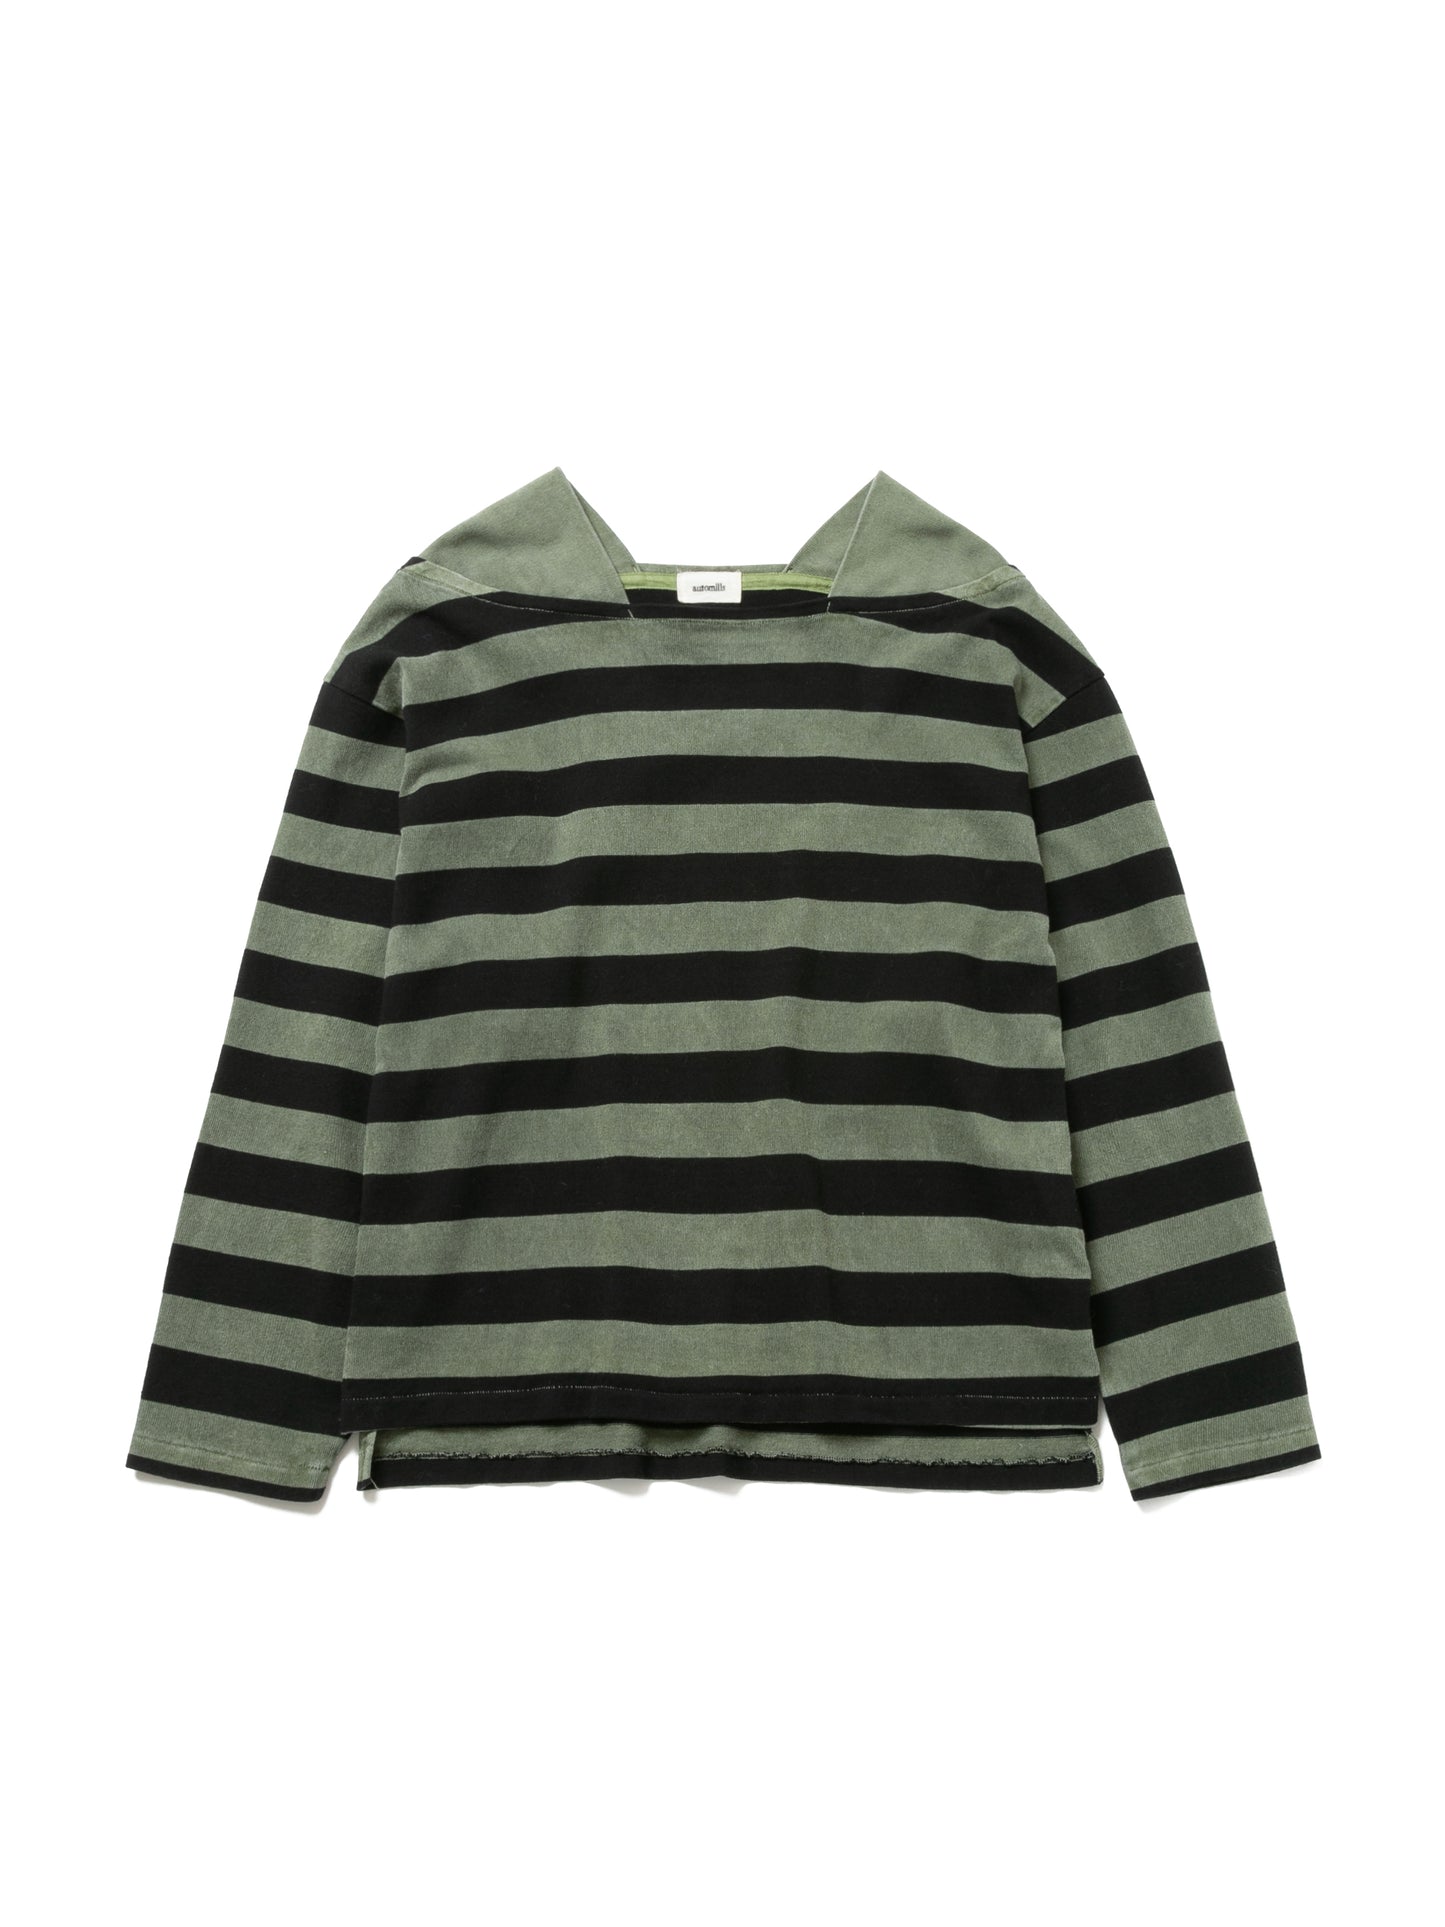 BAGGY BOAT L/S TEE COTTON BORDER JERSEY AM-C0103 Olive